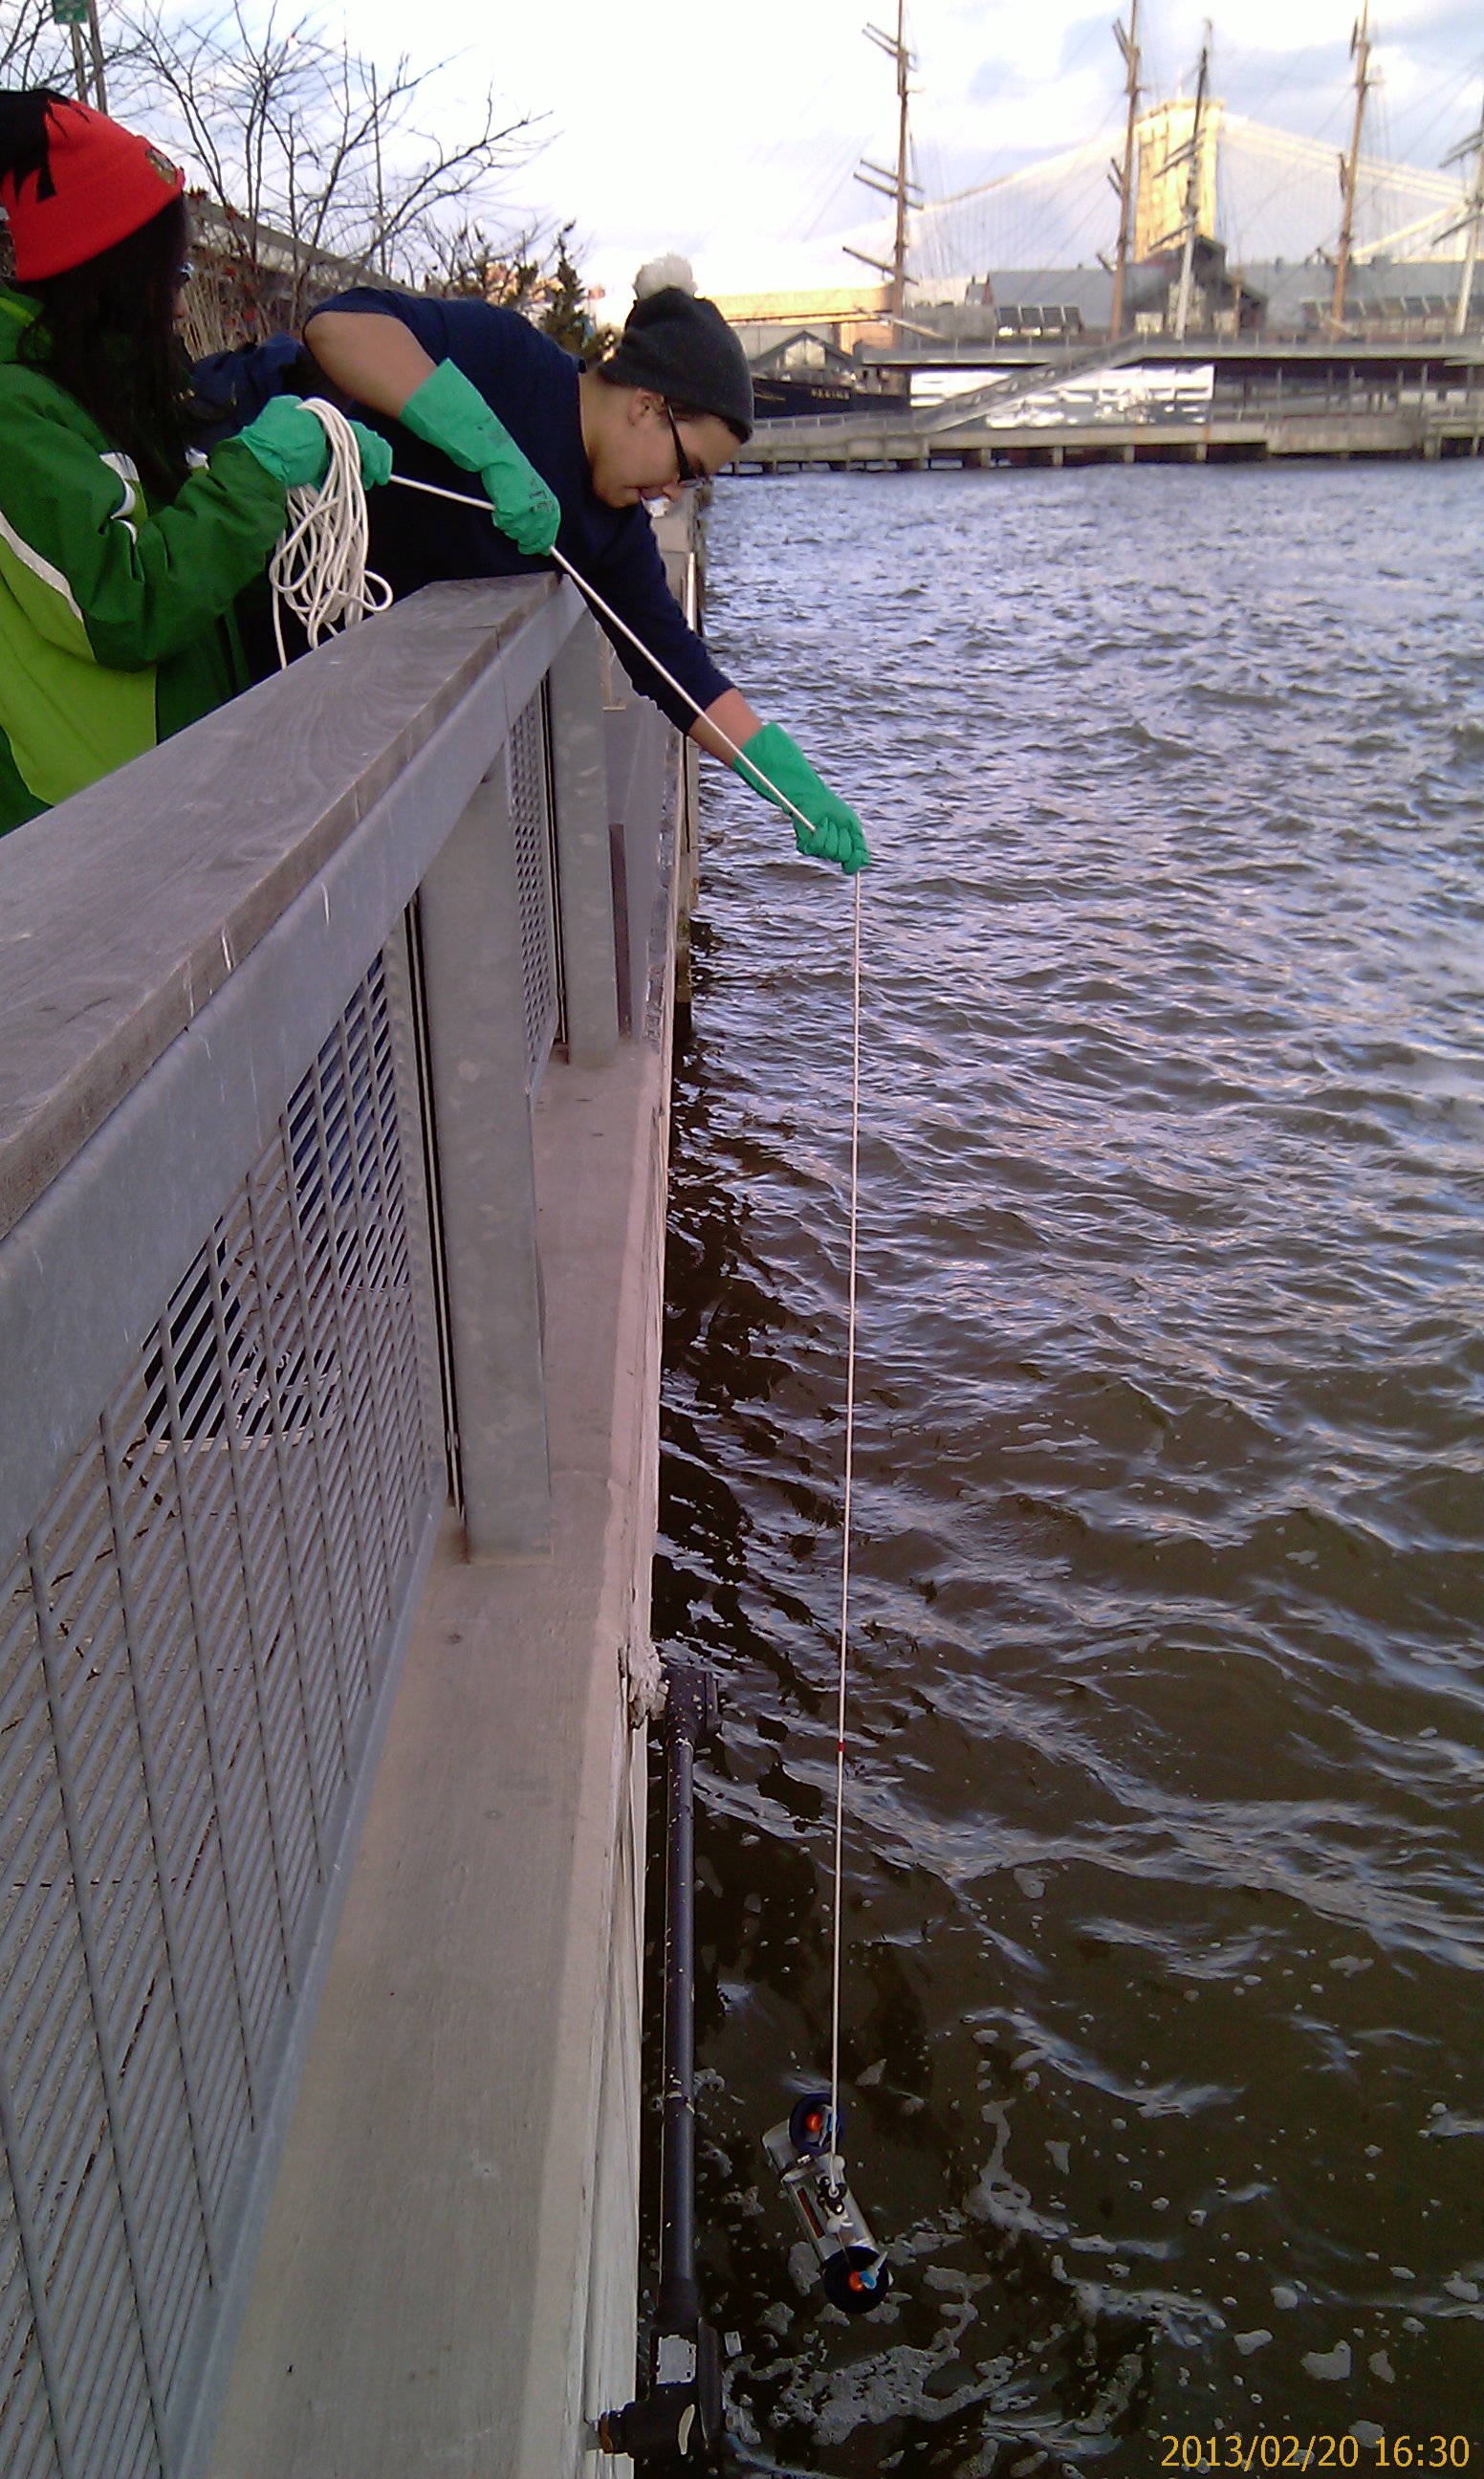 Tahirah and Orlando pull up their group's water sample from the East River